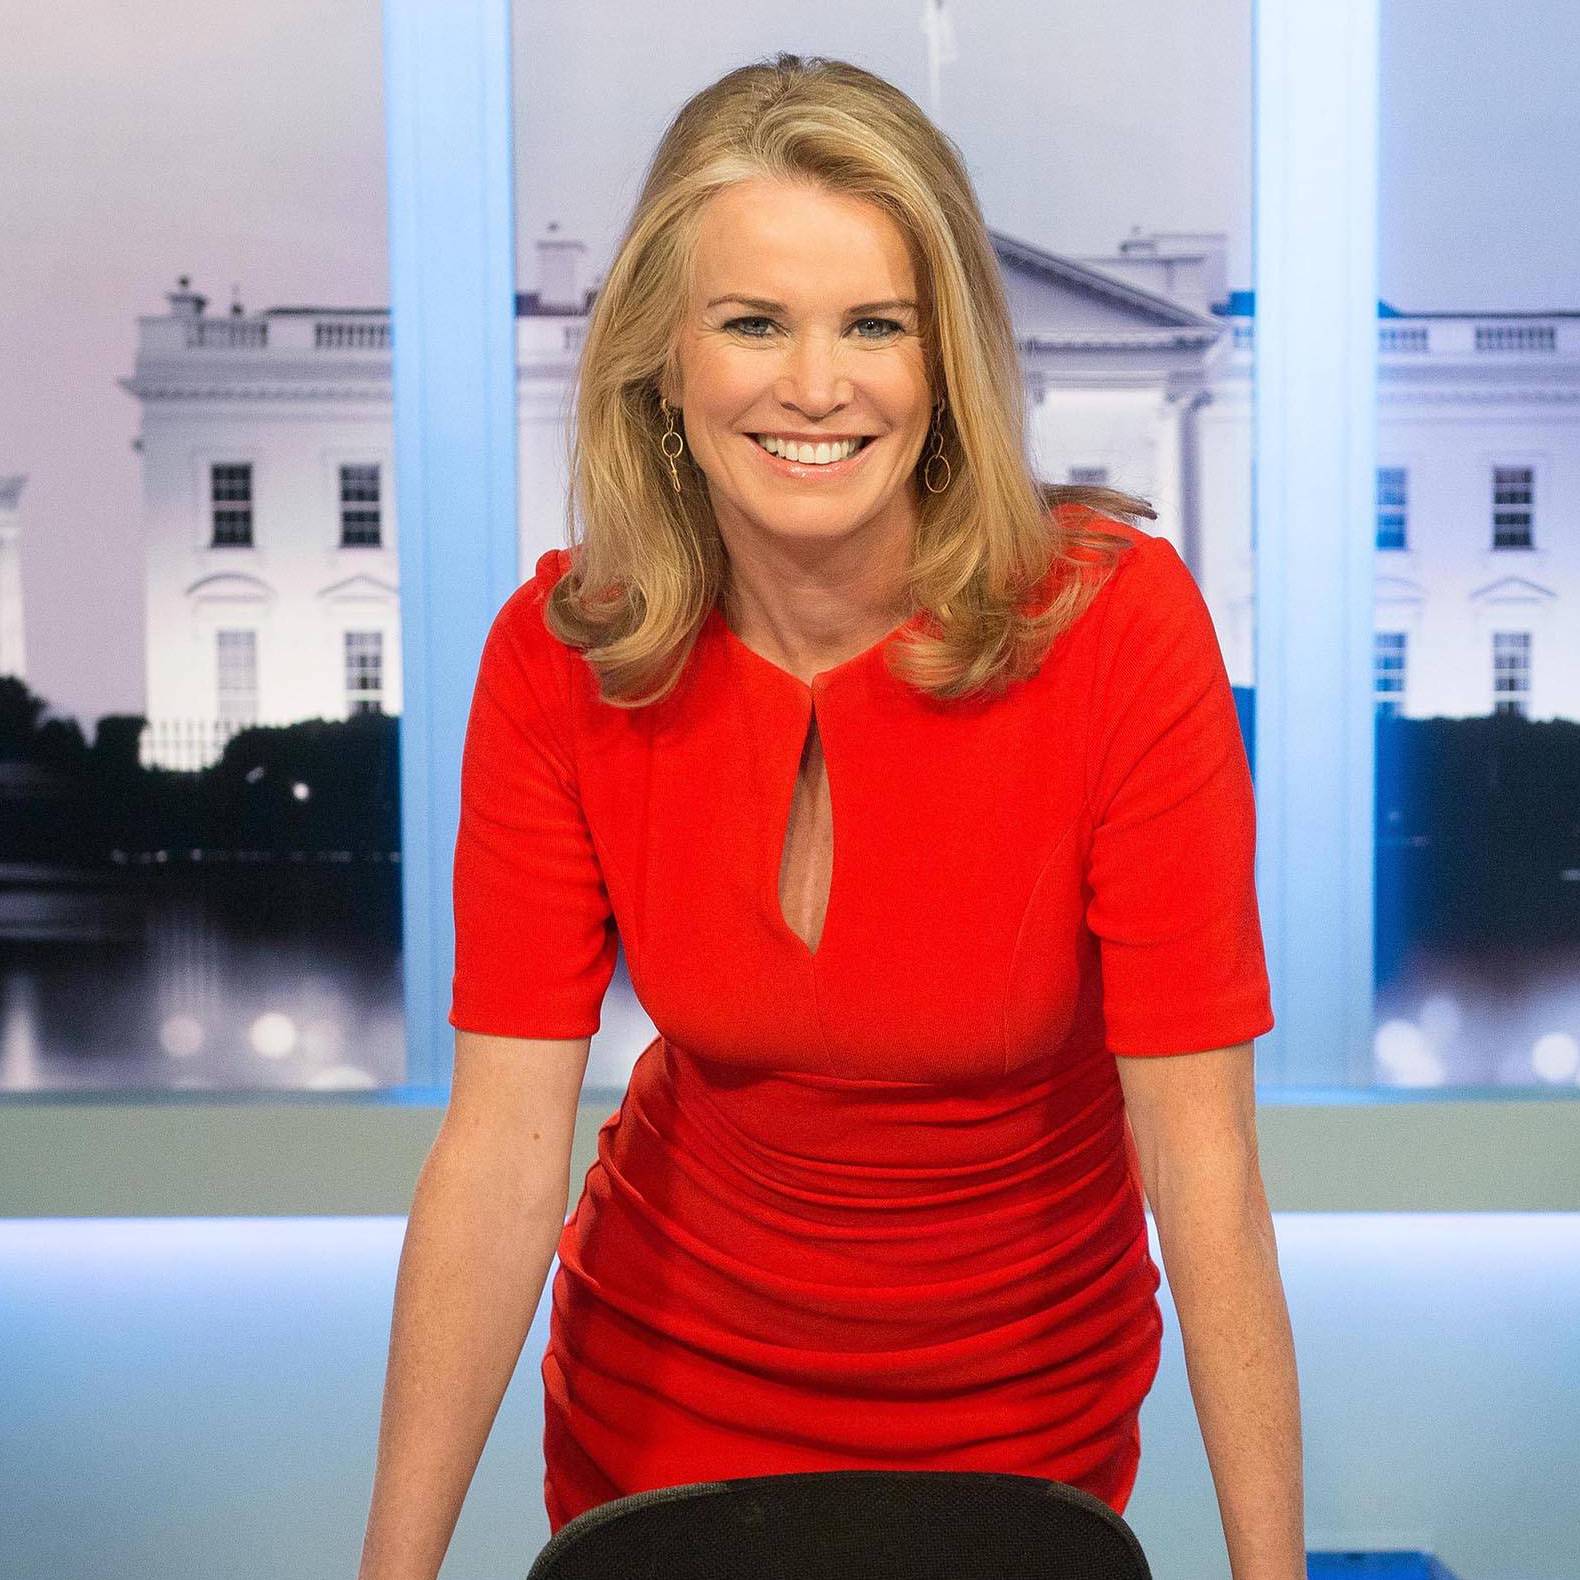 We are excited to have Katty Kay back as a guest on the podcast. 